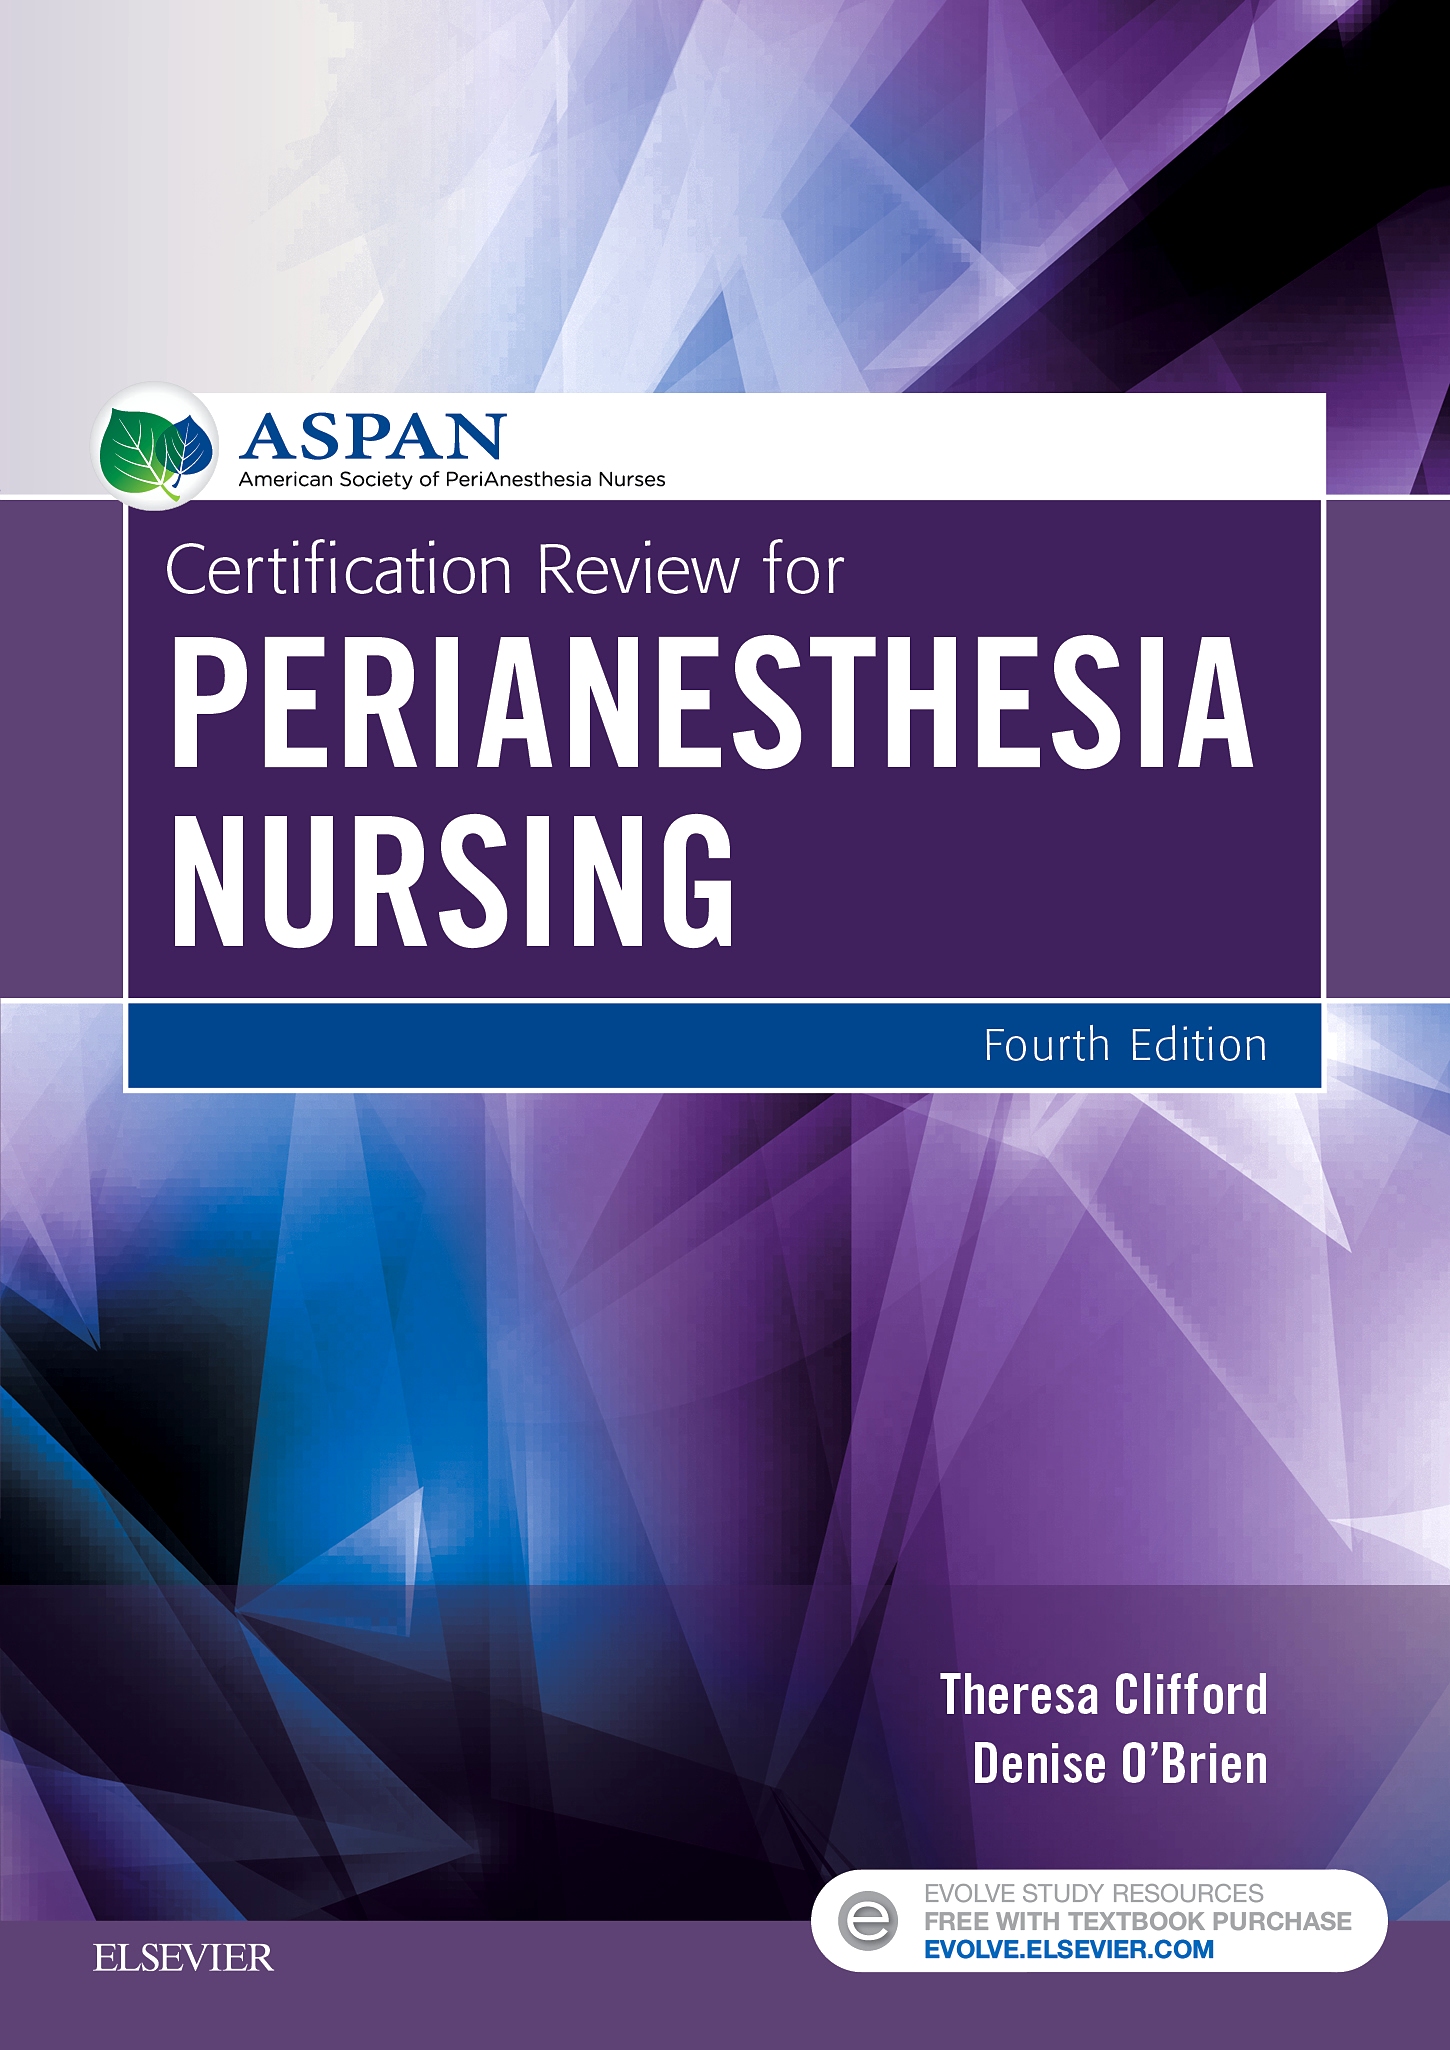 Evolve Resources for Certification Review for PeriAnesthesia Nursing, 4th